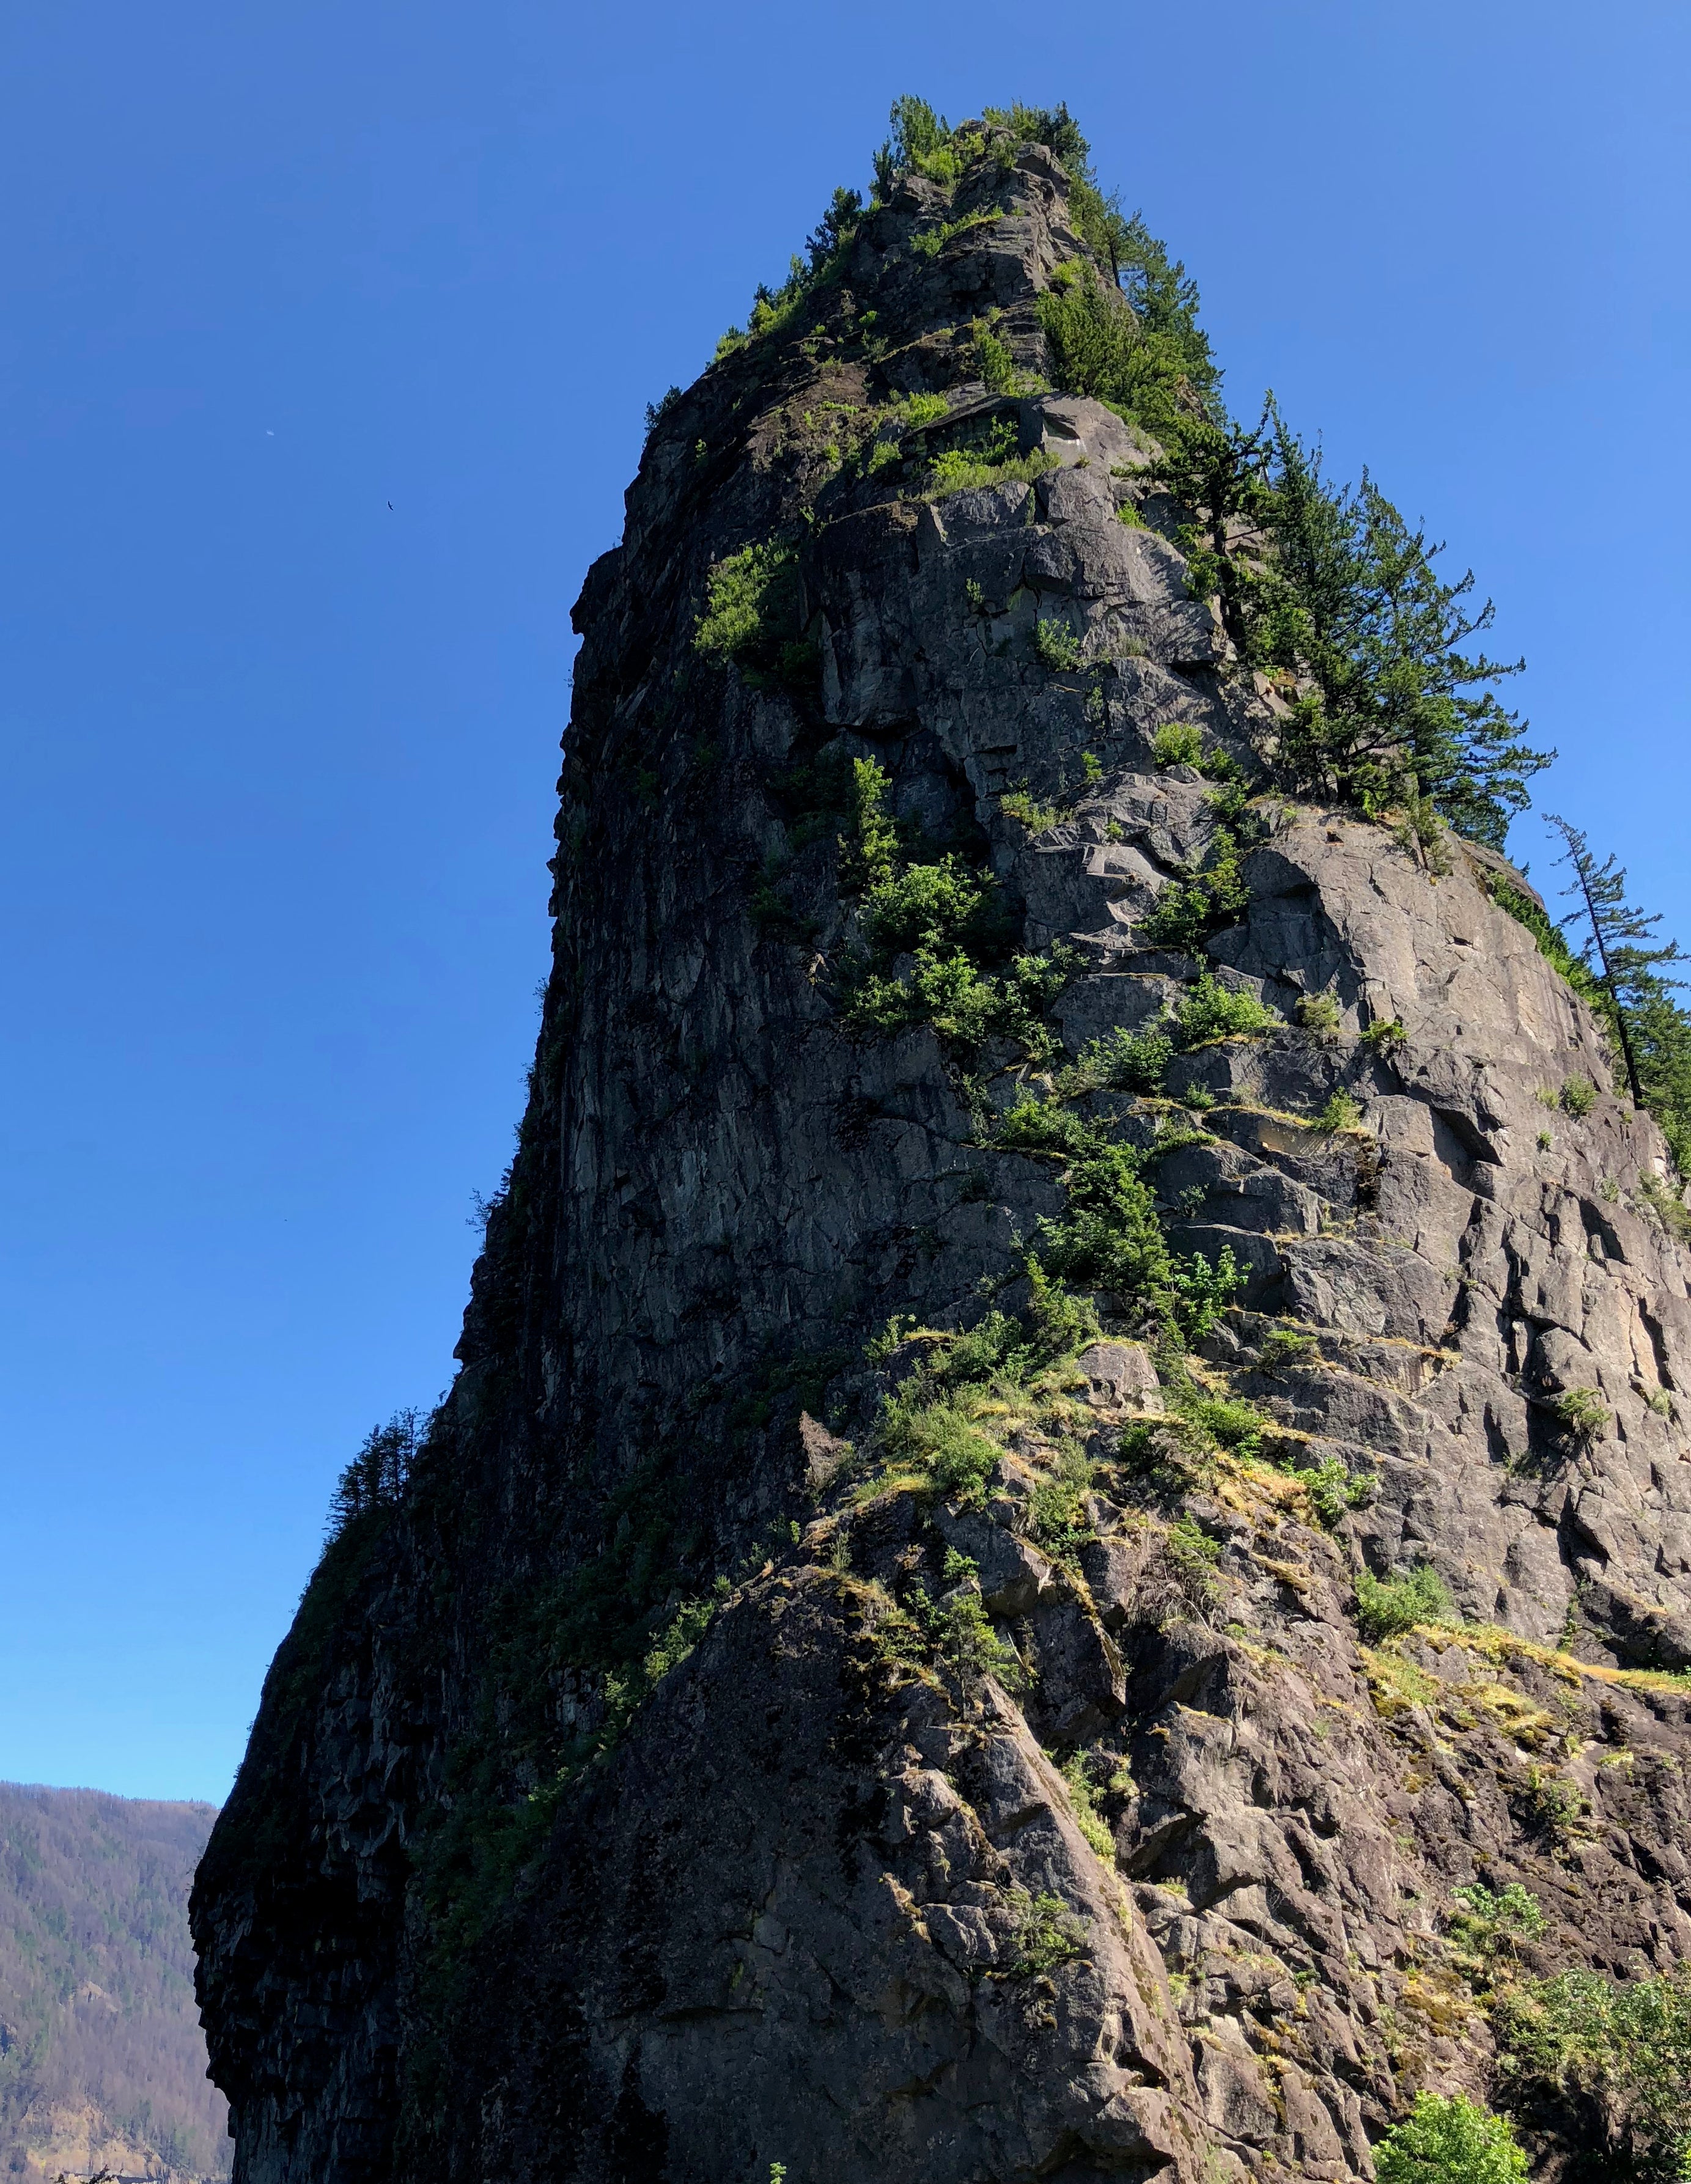 Camper submitted image from Beacon Rock State Park - 2